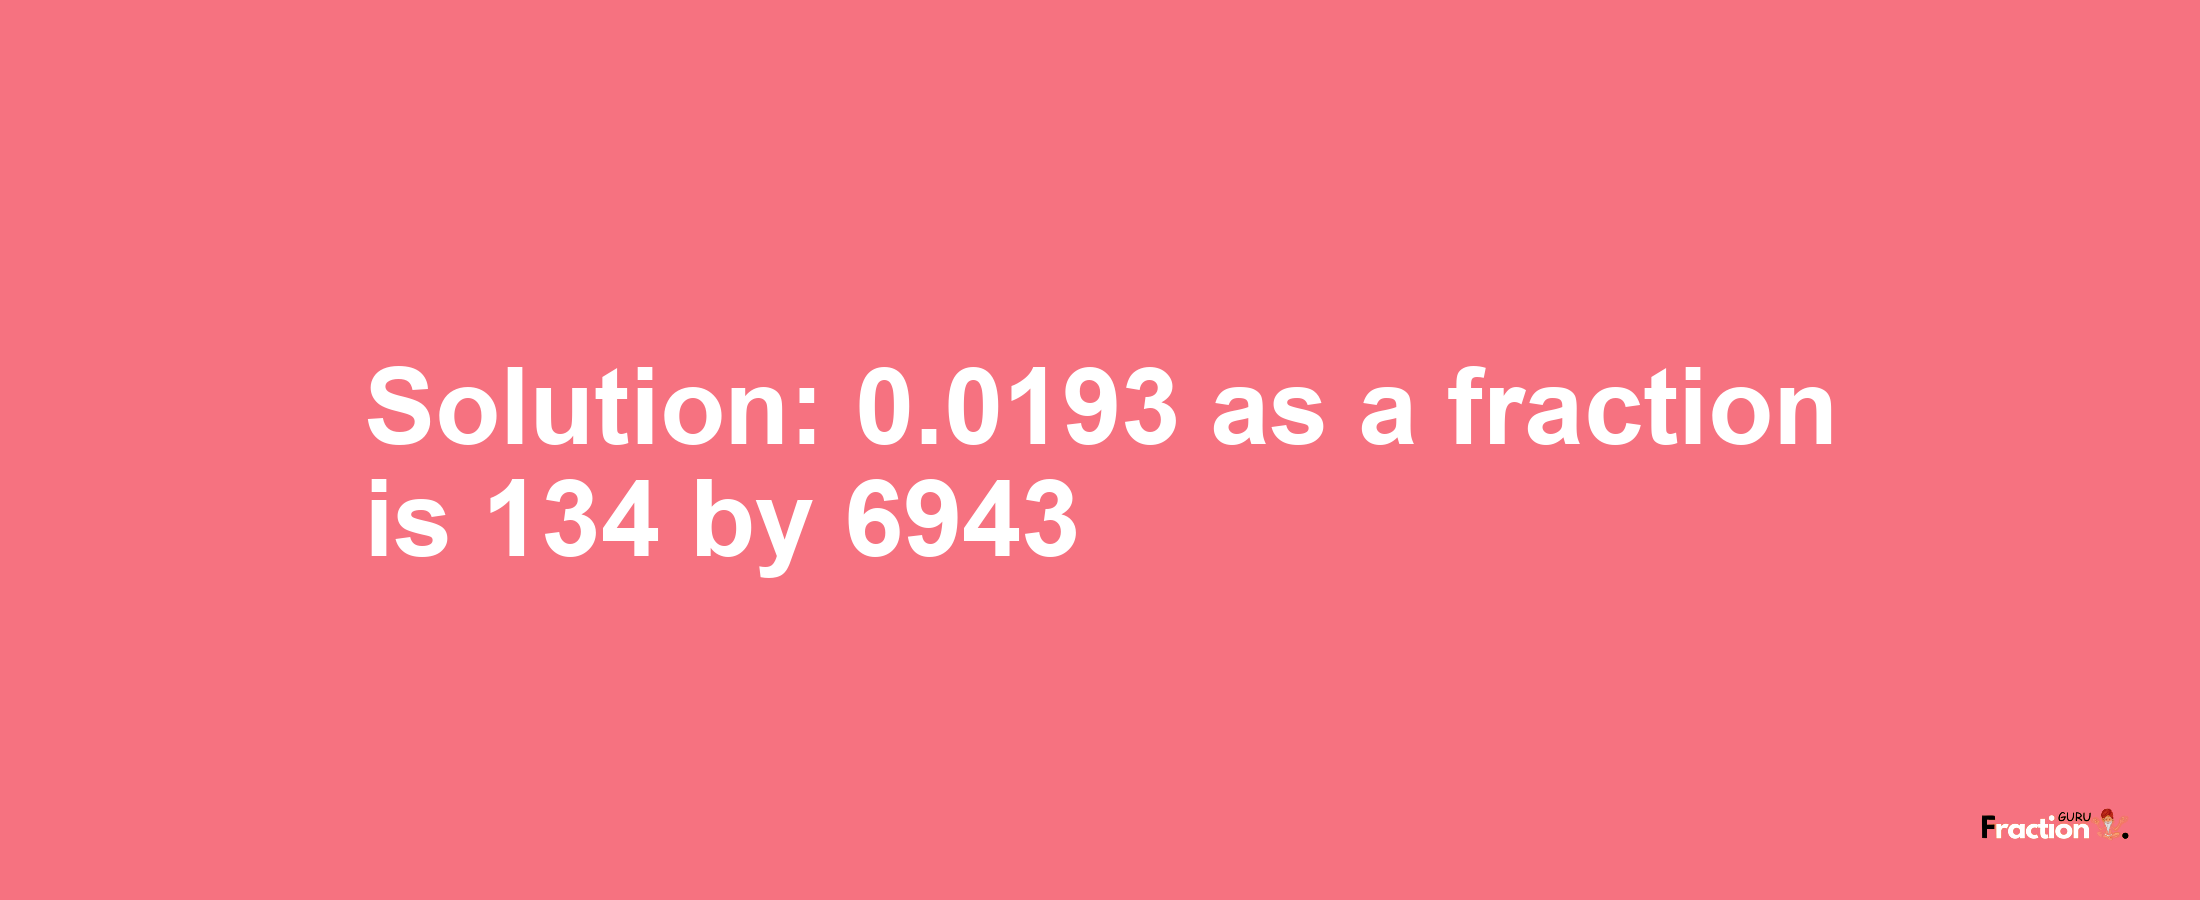 Solution:0.0193 as a fraction is 134/6943